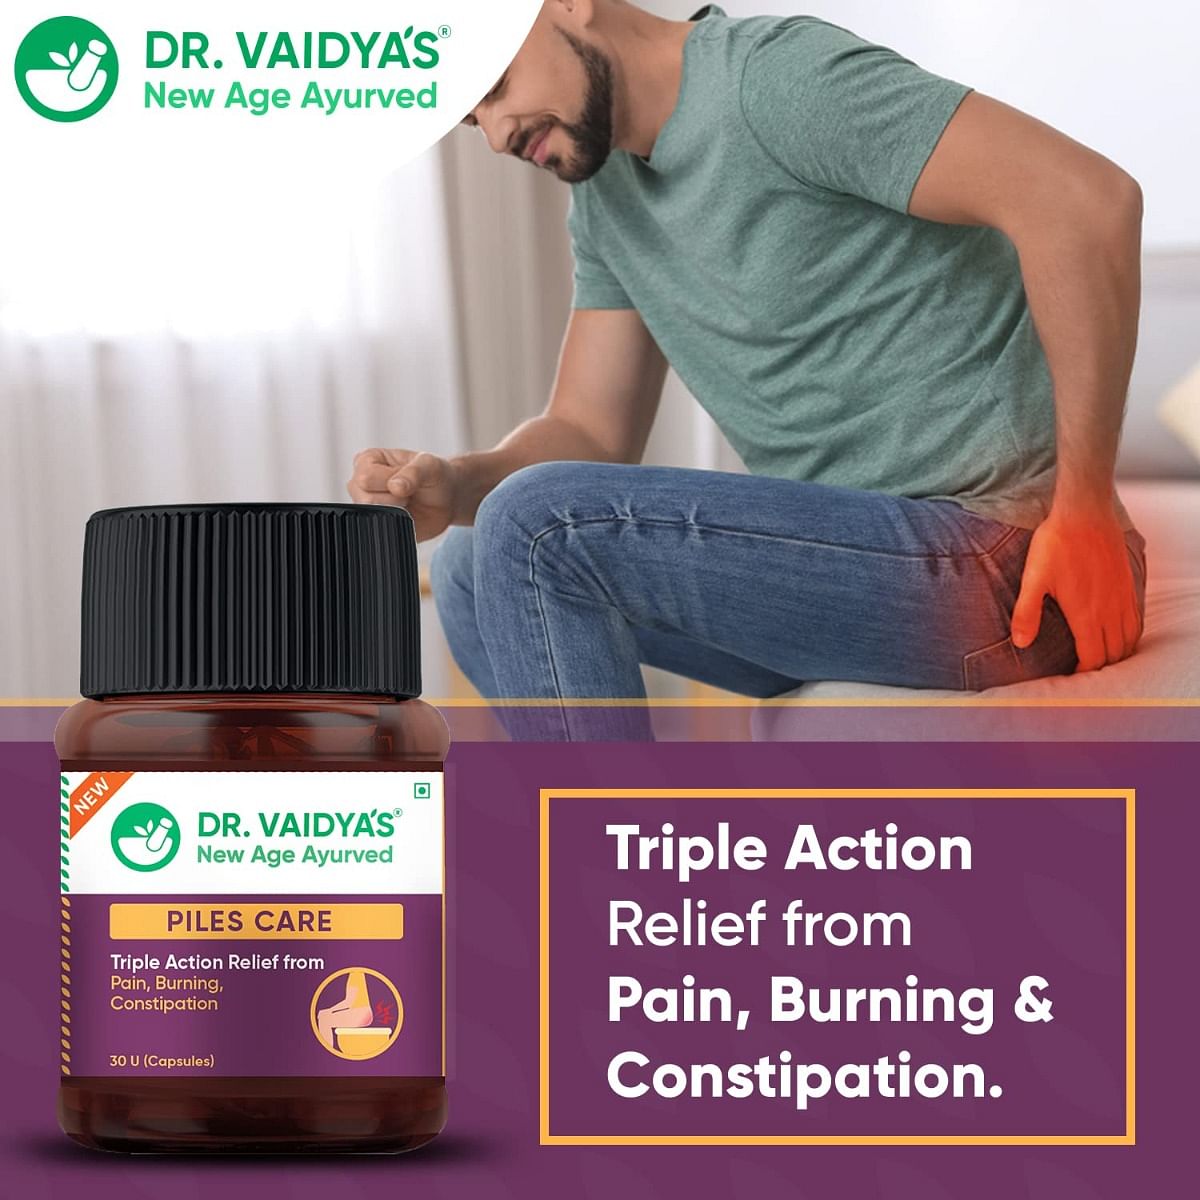 Dr. Vaidyas Piles Care-30 Capsules - Pack Of 1